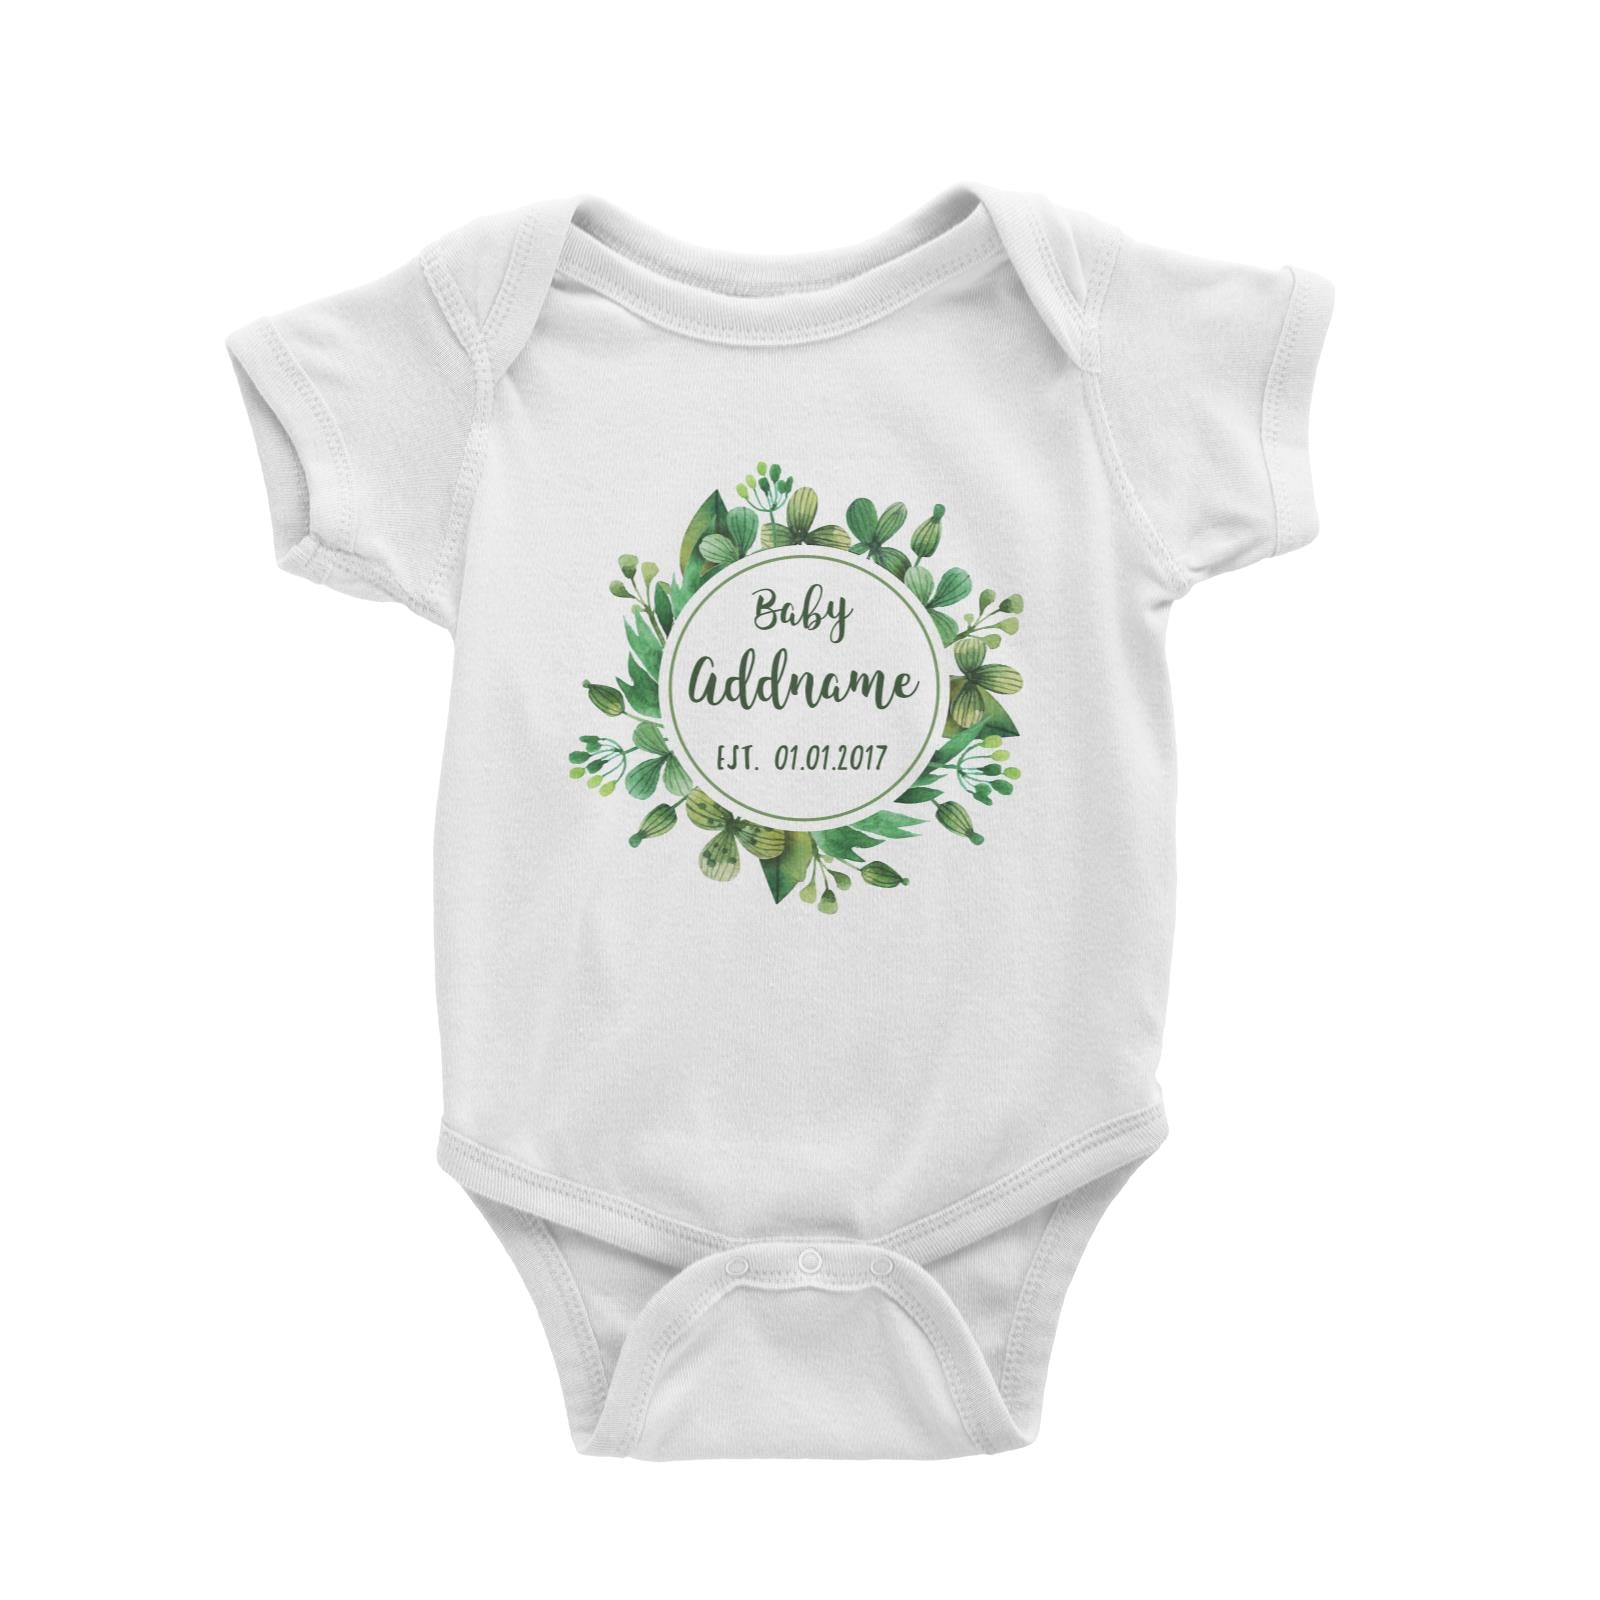 Baby Addname and Add Date in Green Leaf Wreath Baby Romper Personalizable Designs Basic Newborn